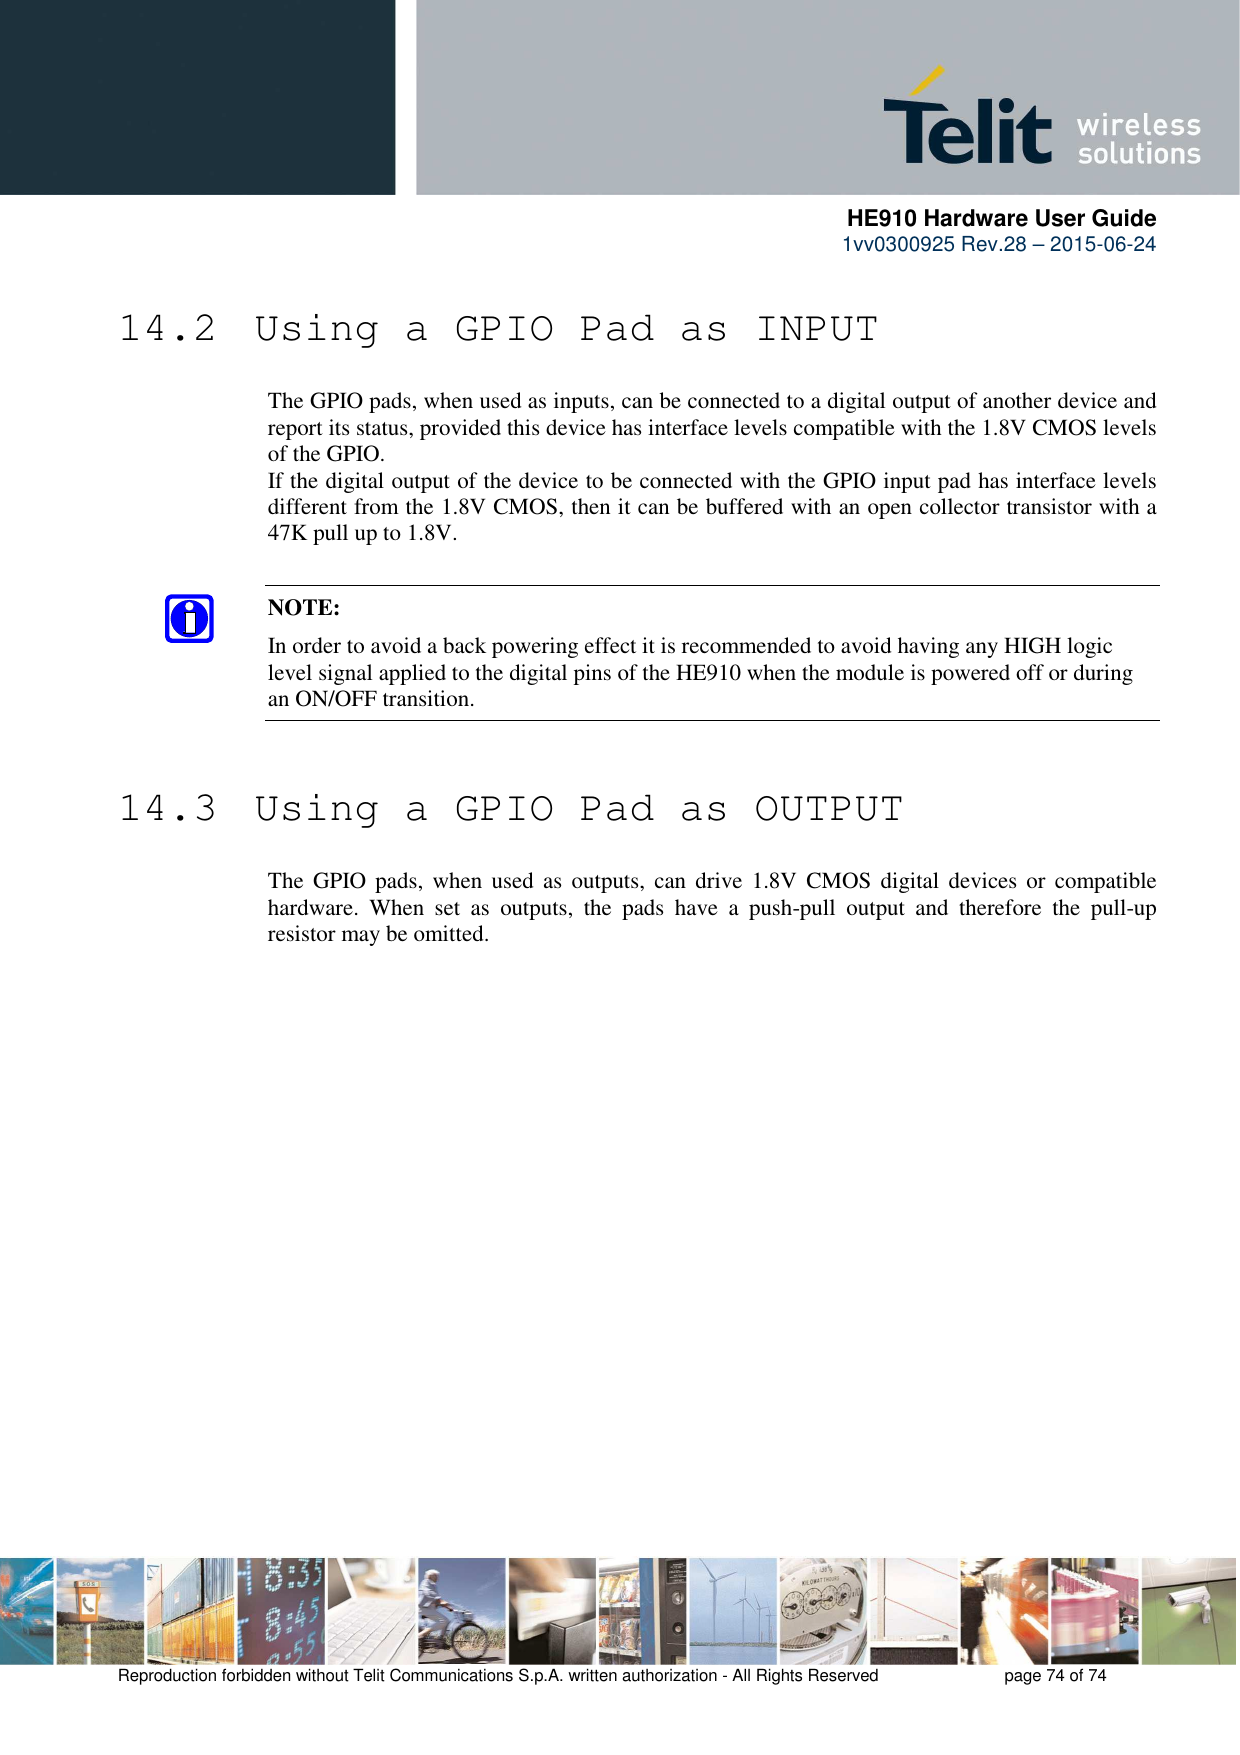      HE910 Hardware User Guide 1vv0300925 Rev.28 – 2015-06-24    Reproduction forbidden without Telit Communications S.p.A. written authorization - All Rights Reserved    page 74 of 74  14.2  Using a GPIO Pad as INPUT The GPIO pads, when used as inputs, can be connected to a digital output of another device and report its status, provided this device has interface levels compatible with the 1.8V CMOS levels of the GPIO.  If the digital output of the device to be connected with the GPIO input pad has interface levels different from the 1.8V CMOS, then it can be buffered with an open collector transistor with a 47K pull up to 1.8V.  NOTE: In order to avoid a back powering effect it is recommended to avoid having any HIGH logic level signal applied to the digital pins of the HE910 when the module is powered off or during an ON/OFF transition.  14.3  Using a GPIO Pad as OUTPUT The  GPIO pads,  when  used  as  outputs,  can  drive 1.8V  CMOS  digital  devices or  compatible hardware.  When  set  as  outputs,  the  pads  have  a  push-pull  output  and  therefore  the  pull-up resistor may be omitted.  